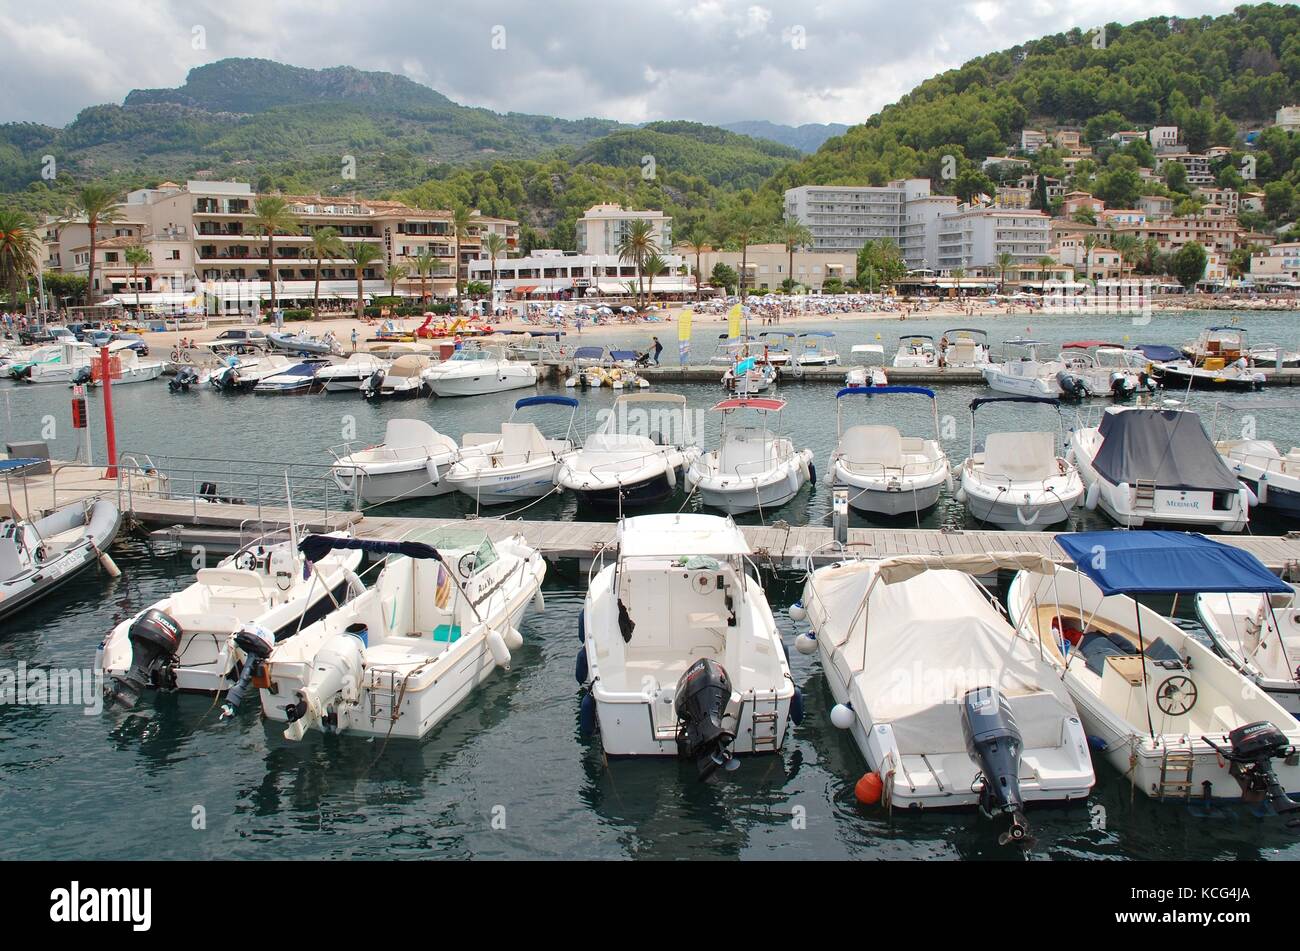 Boats moored in the harbour at Port de Soller on the Spanish island of Majorca on September 6, 2017. Stock Photo